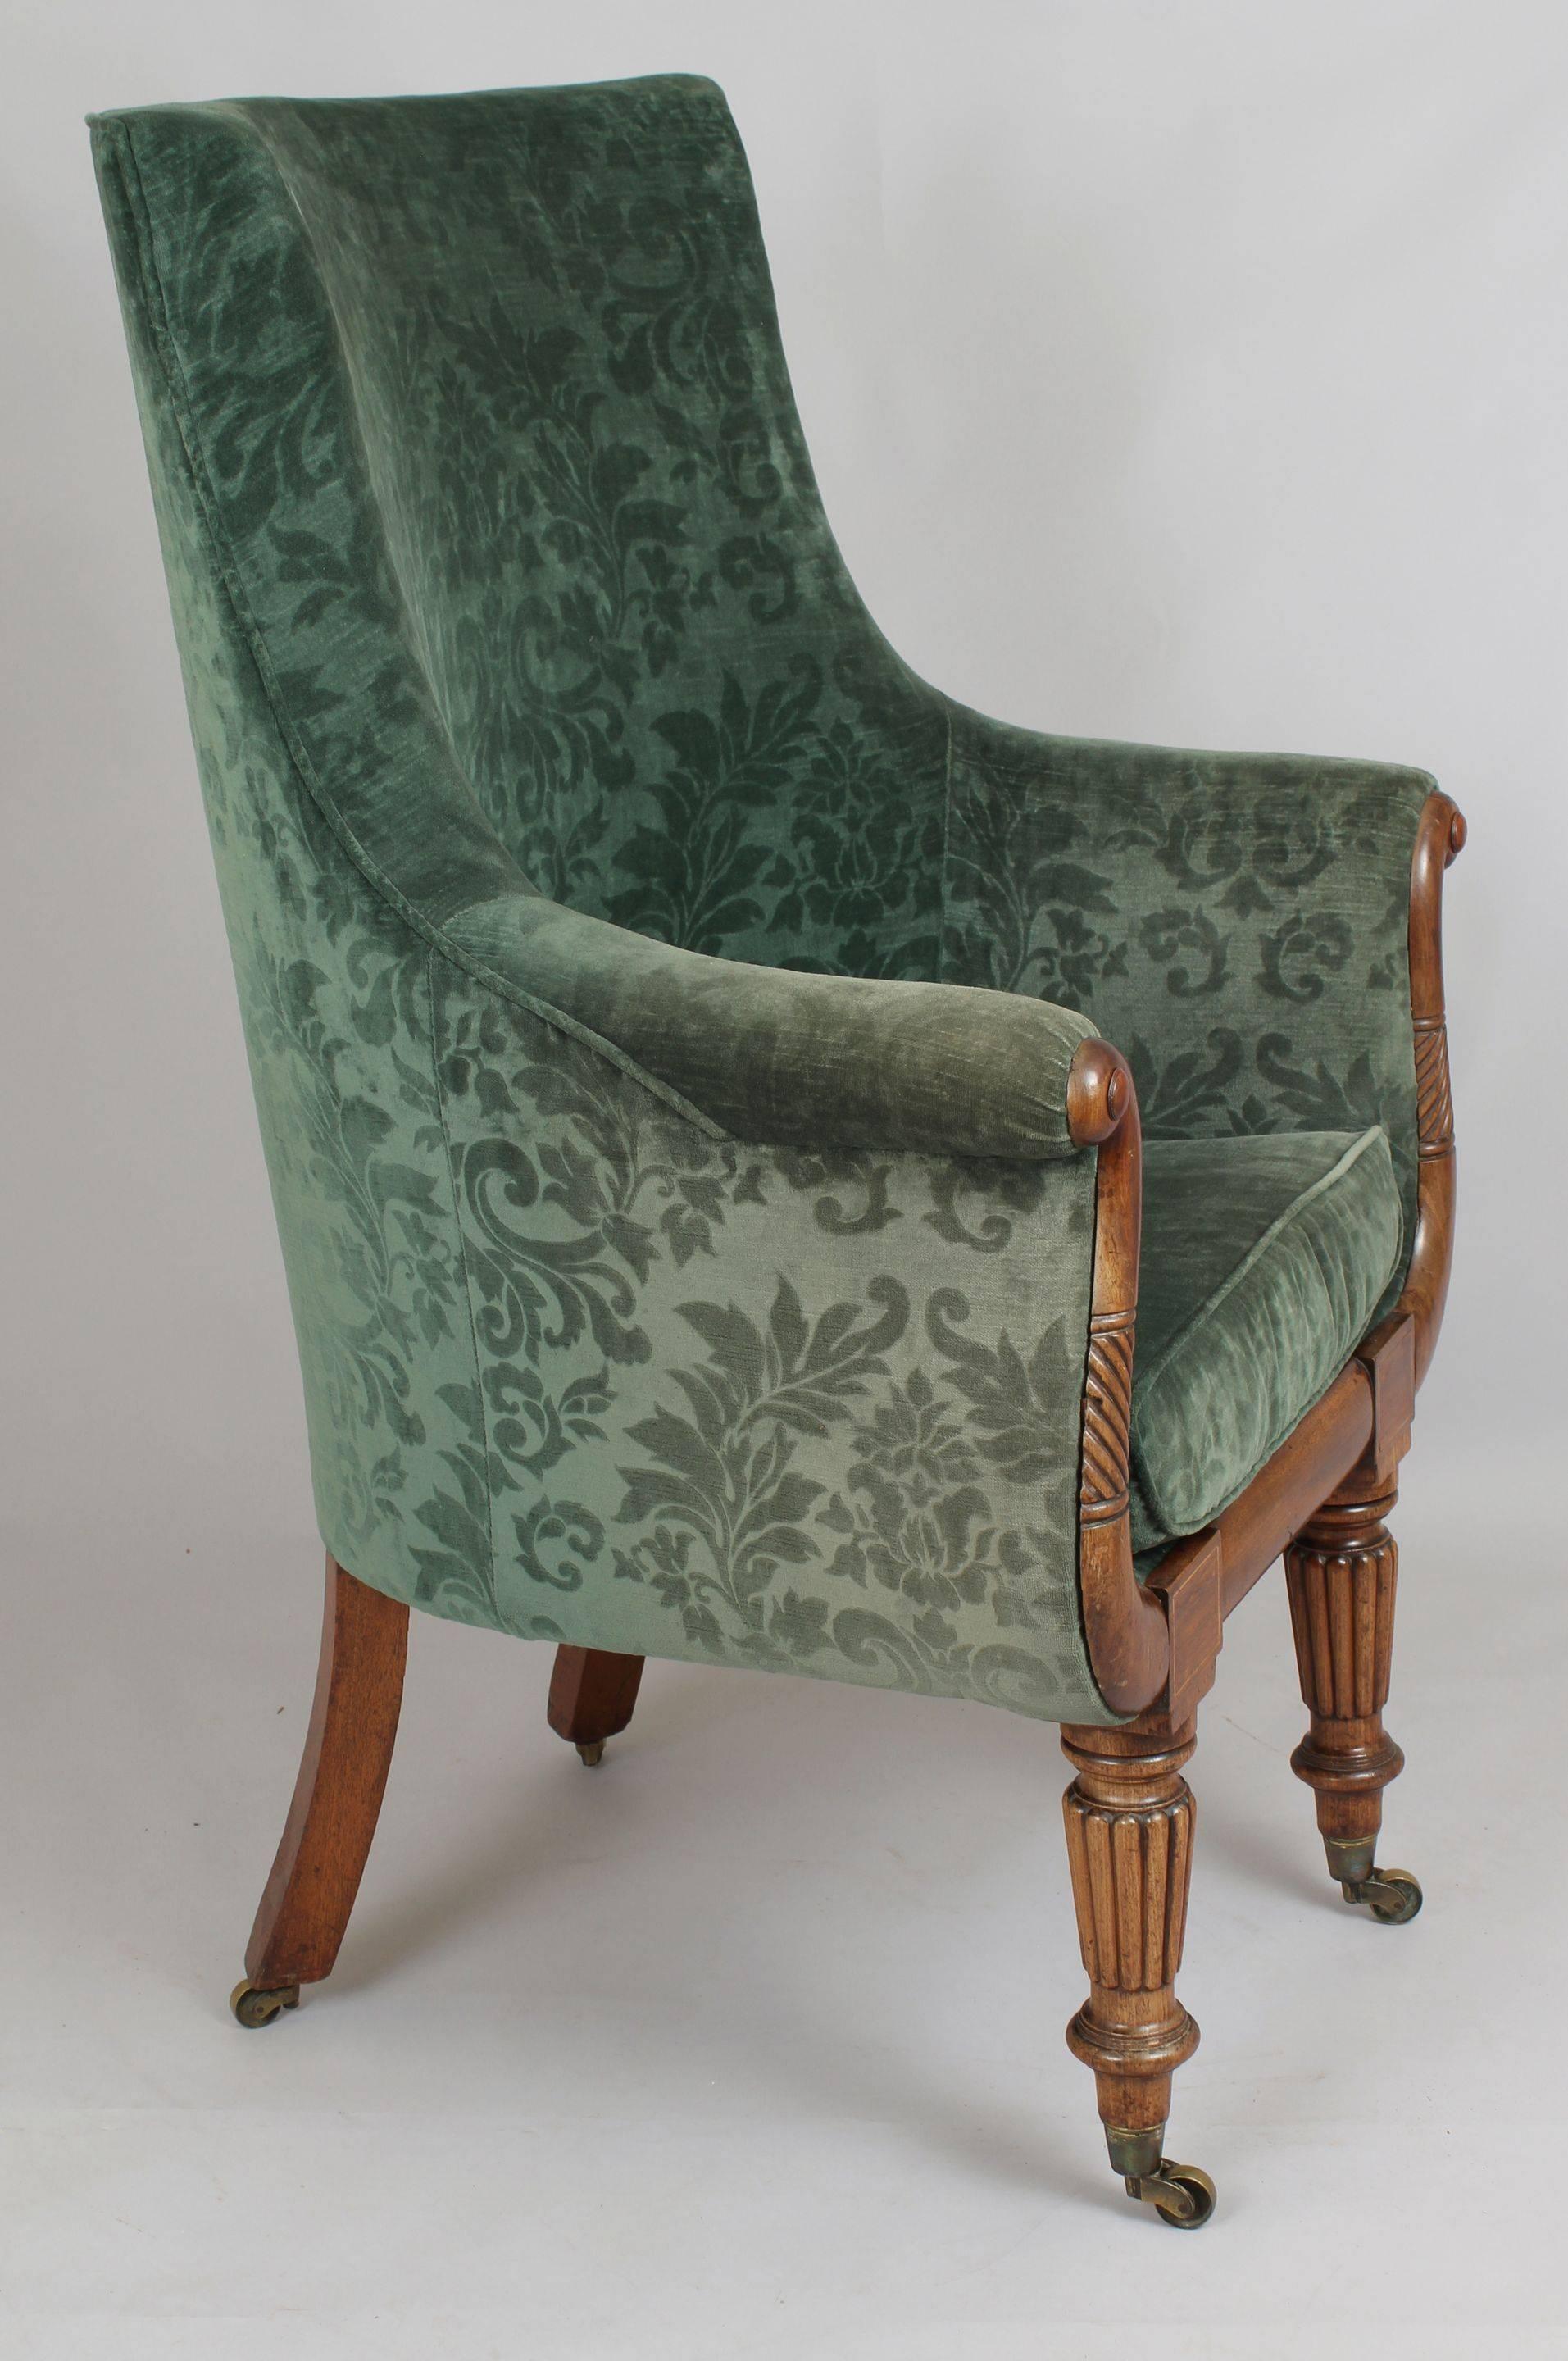 William IV Period Tall-Backed Easy-Chair In Good Condition For Sale In Cambridge, GB